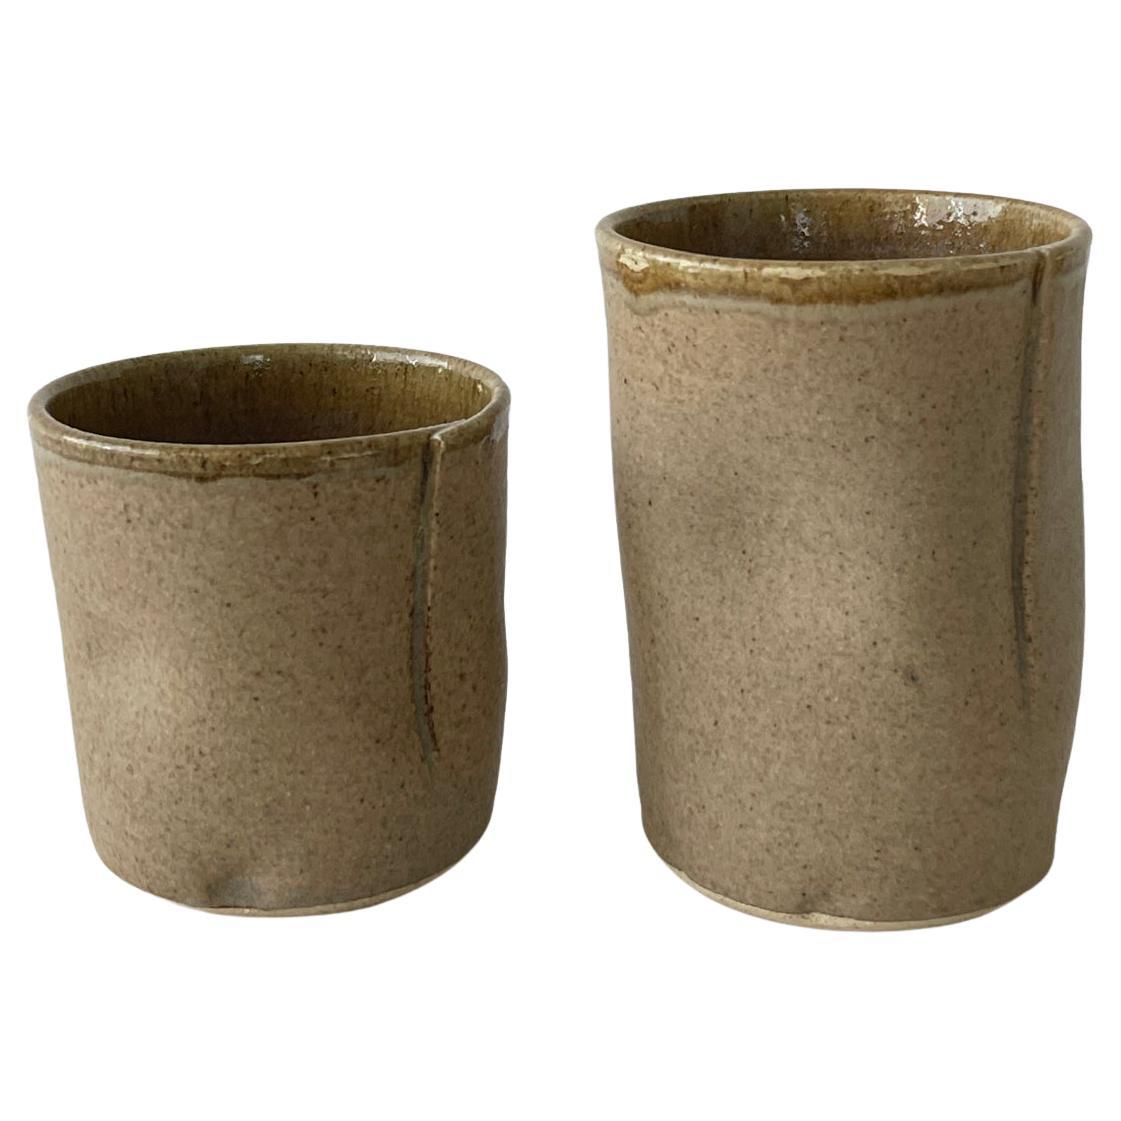 20th Century Ceramic Handcrafted Cup Set